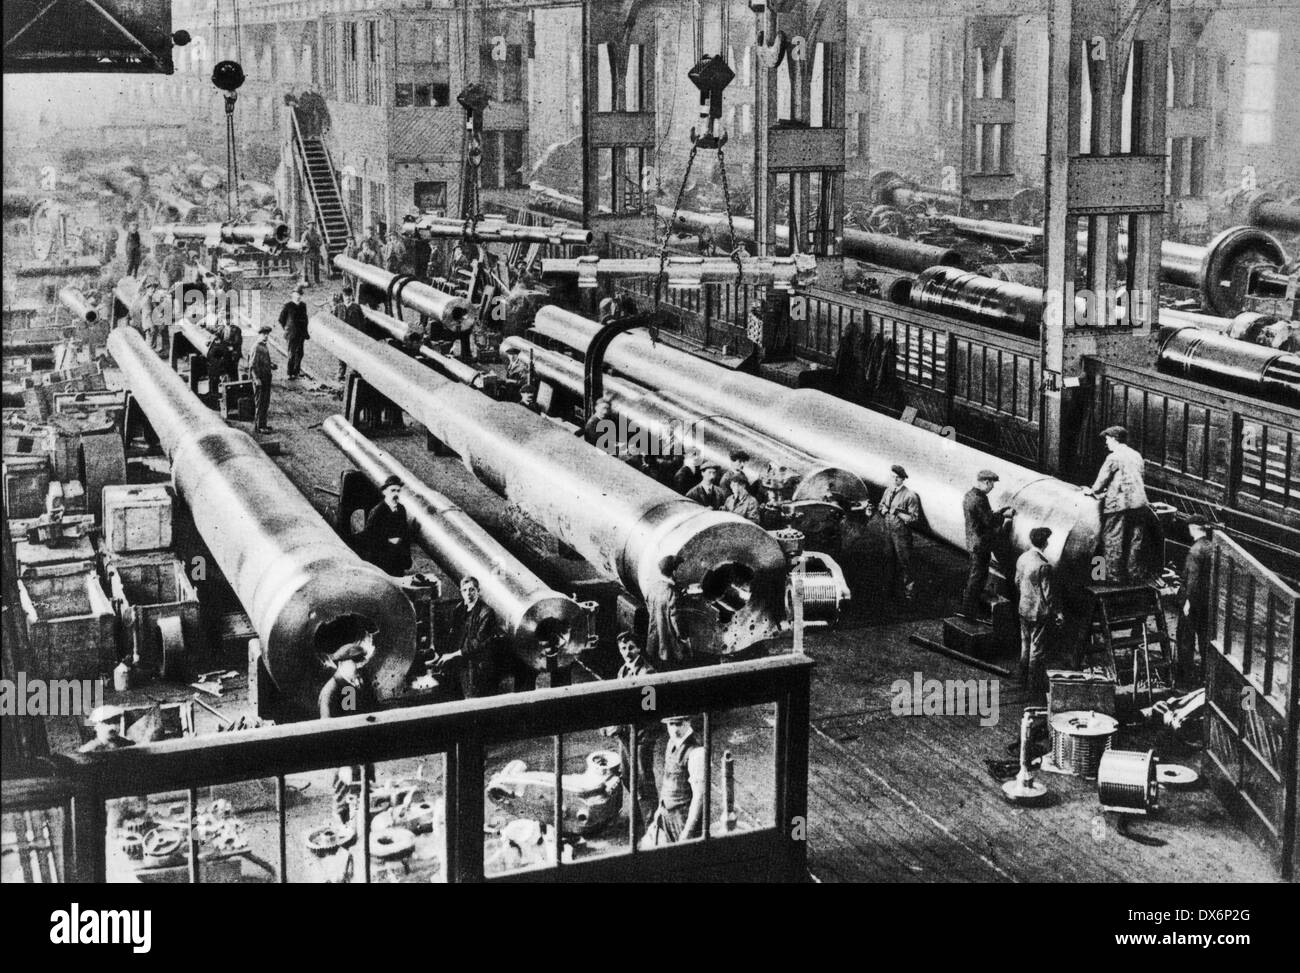 ORDNANCE WORKS, Coventry. Manufacturing 15-inch naval guns during the First World War Stock Photo